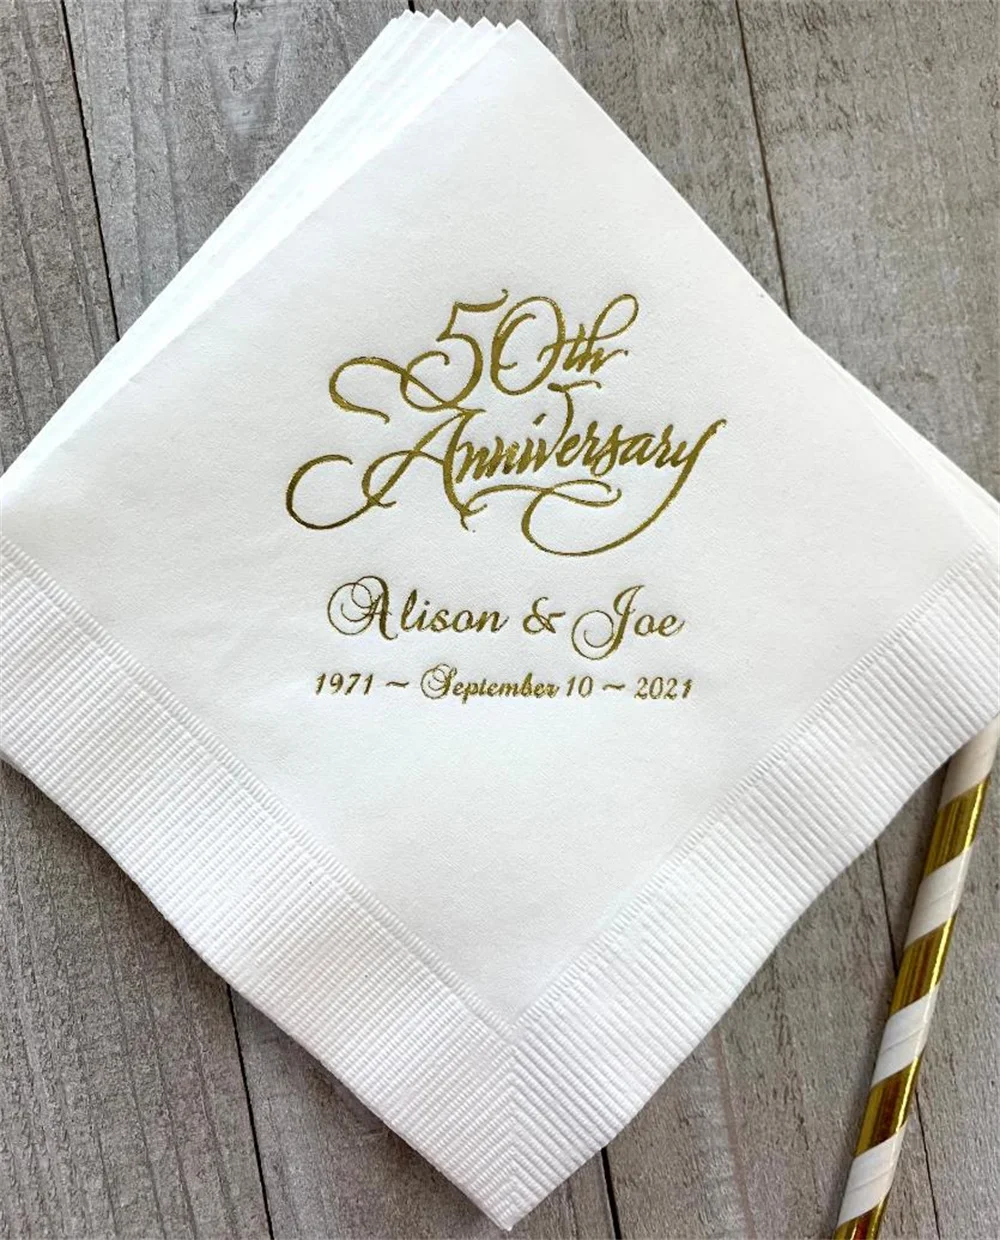 

Personalized Napkins Beverage & Luncheon Size Available Wedding Napkins Shower Engagement Custom Monogram 50th Anniversary